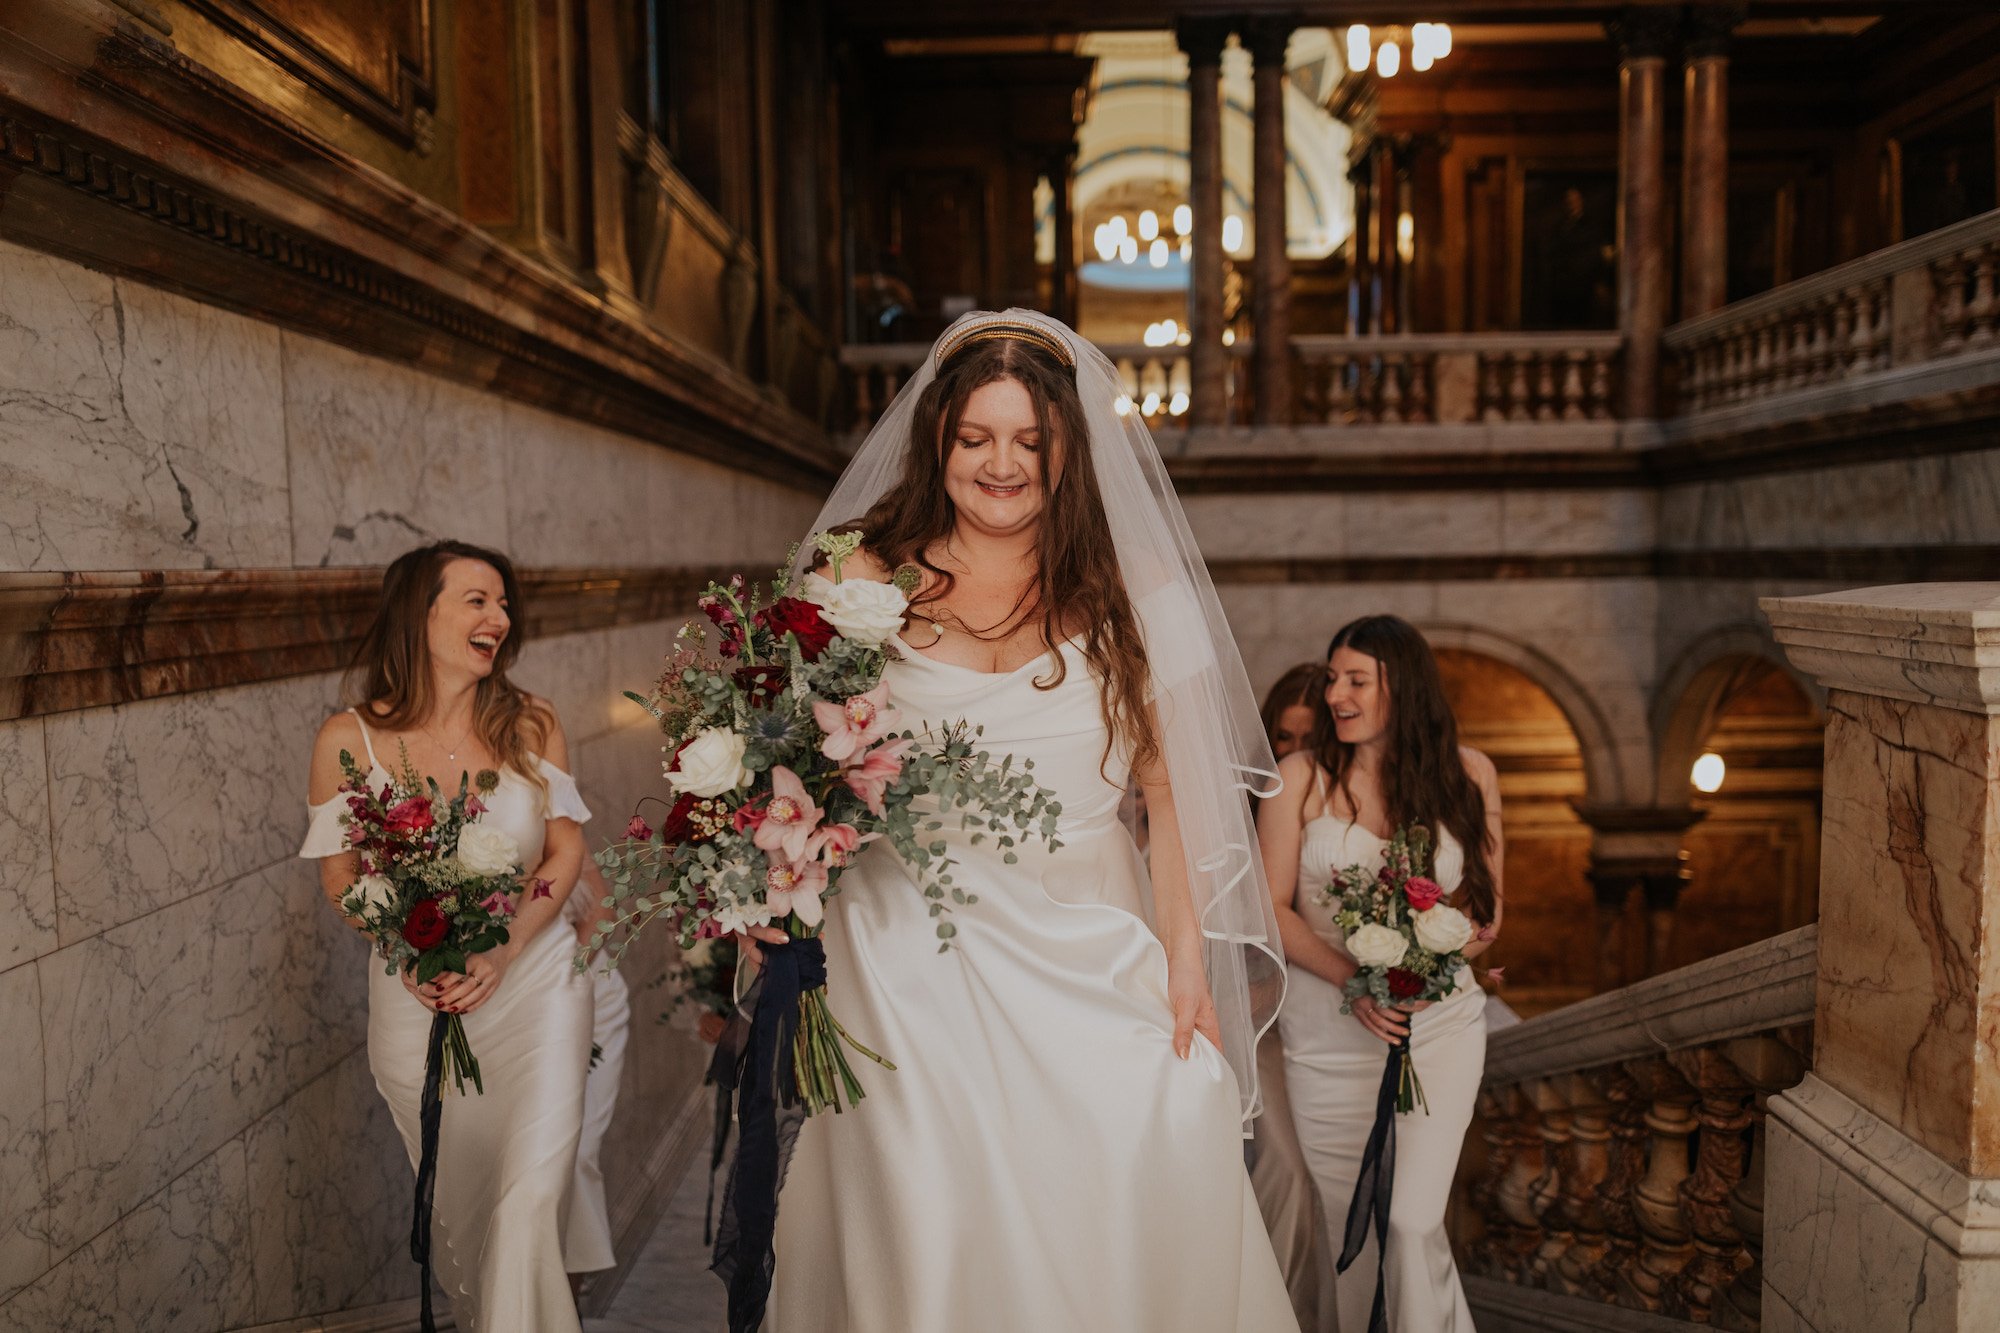 Beautiful bride Kate wore the Okotan corset and Ellie skirt | Wedding dresses and separates by Halfpenny London